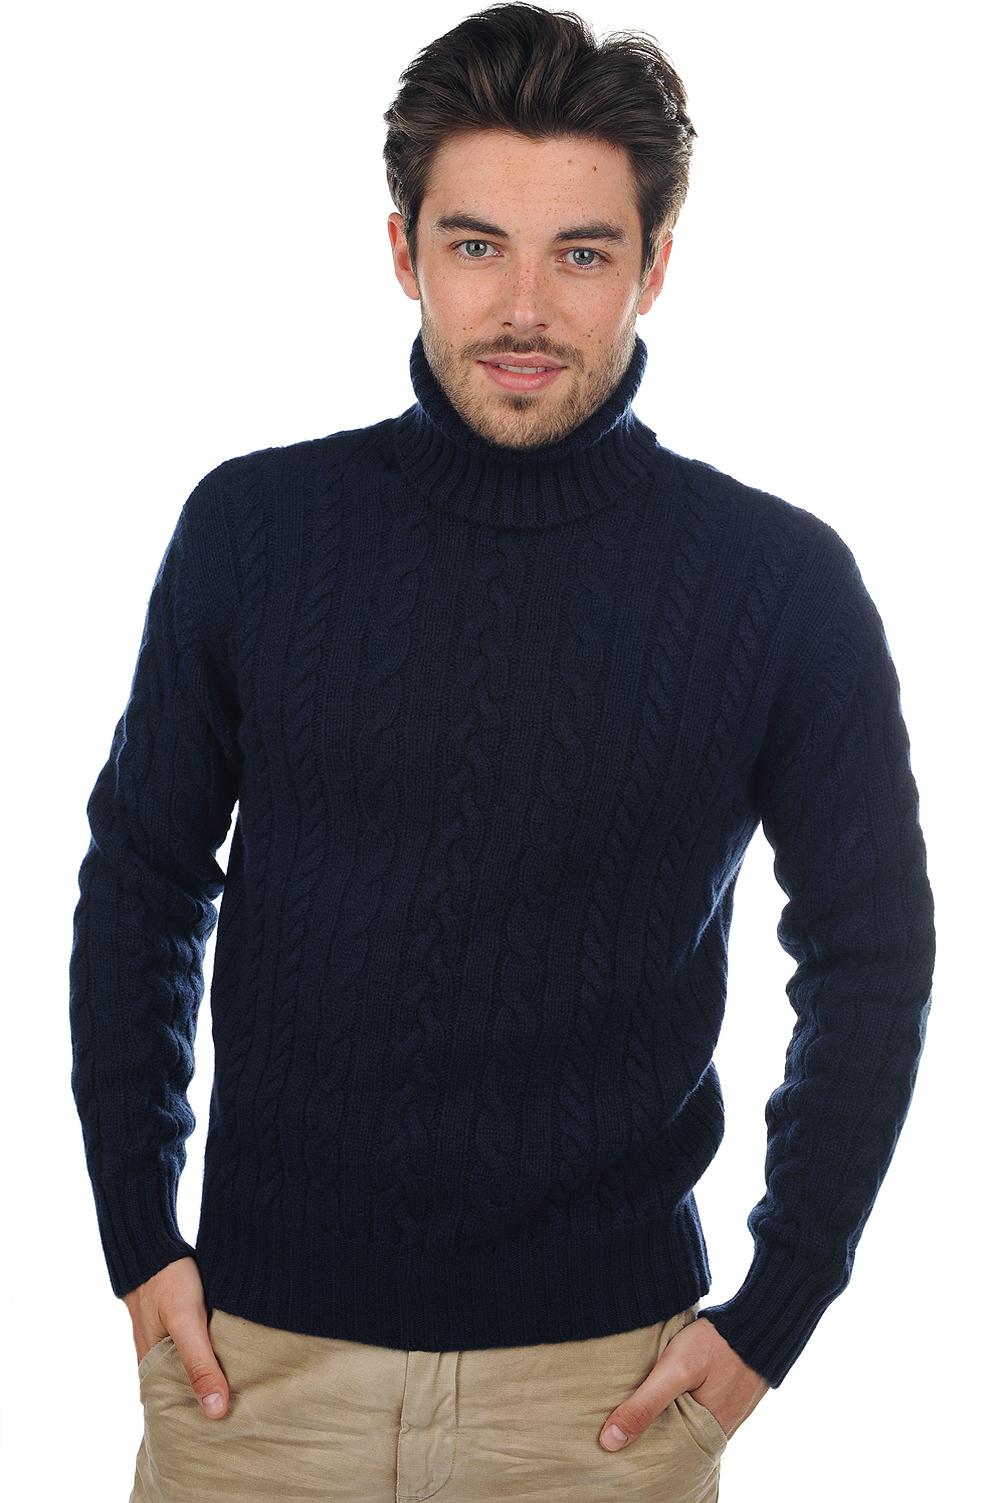 Cachemire pull homme lucas marine fonce 4xl